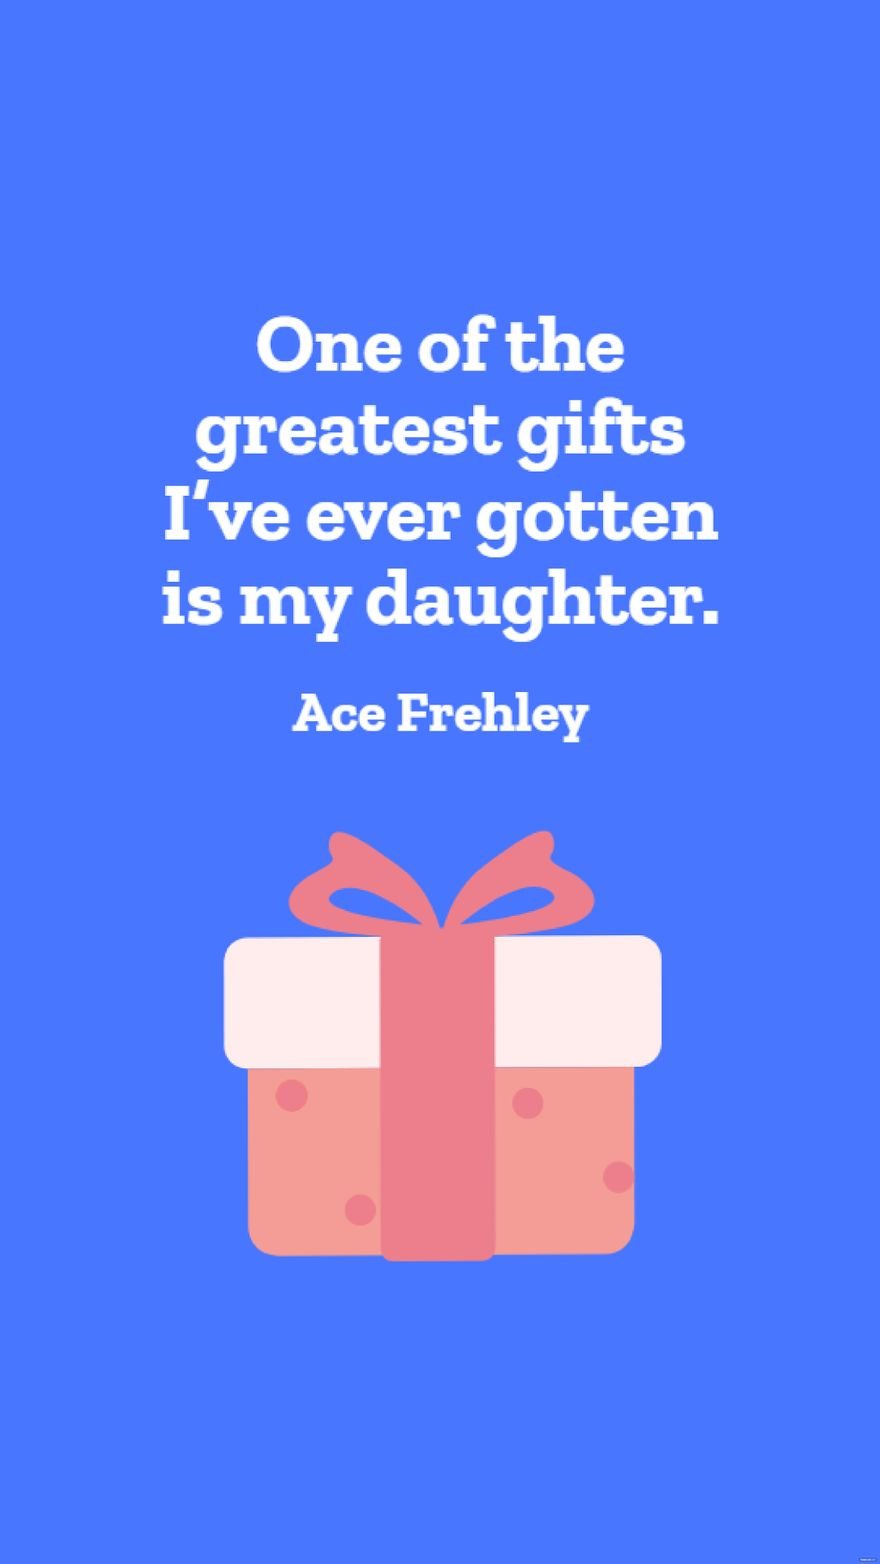 Free Ace Frehley - One of the greatest gifts I’ve ever gotten is my daughter. in JPG